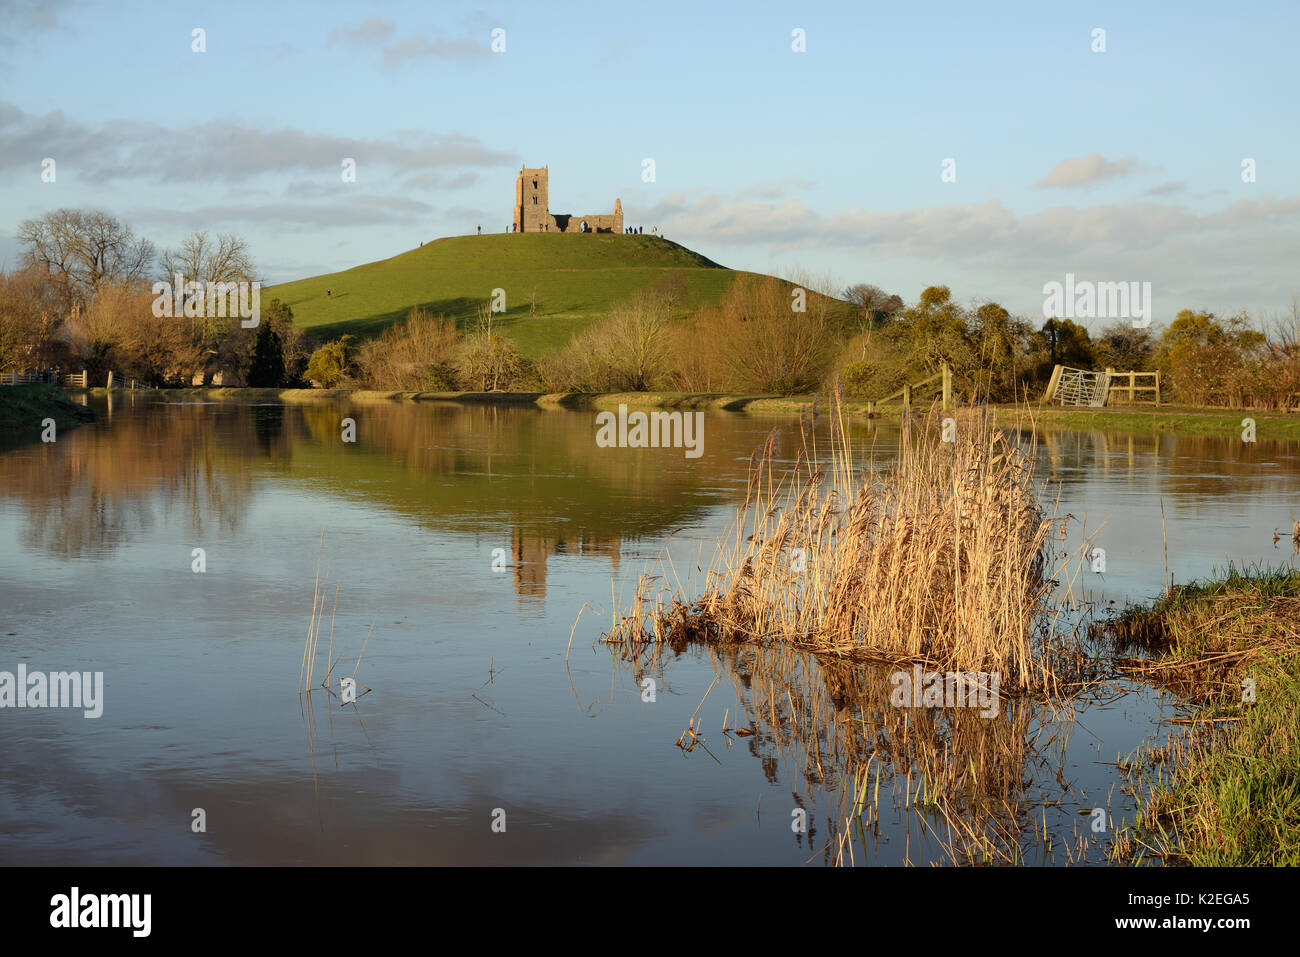 Swollen river banks at confluence of the Parrett and Tone rivers after weeks of heavy rain, with ruined St. Michael's church on Barrow Mump hill in the background, Burrowbridge, Somerset Levels, UK, February 2014. Stock Photo